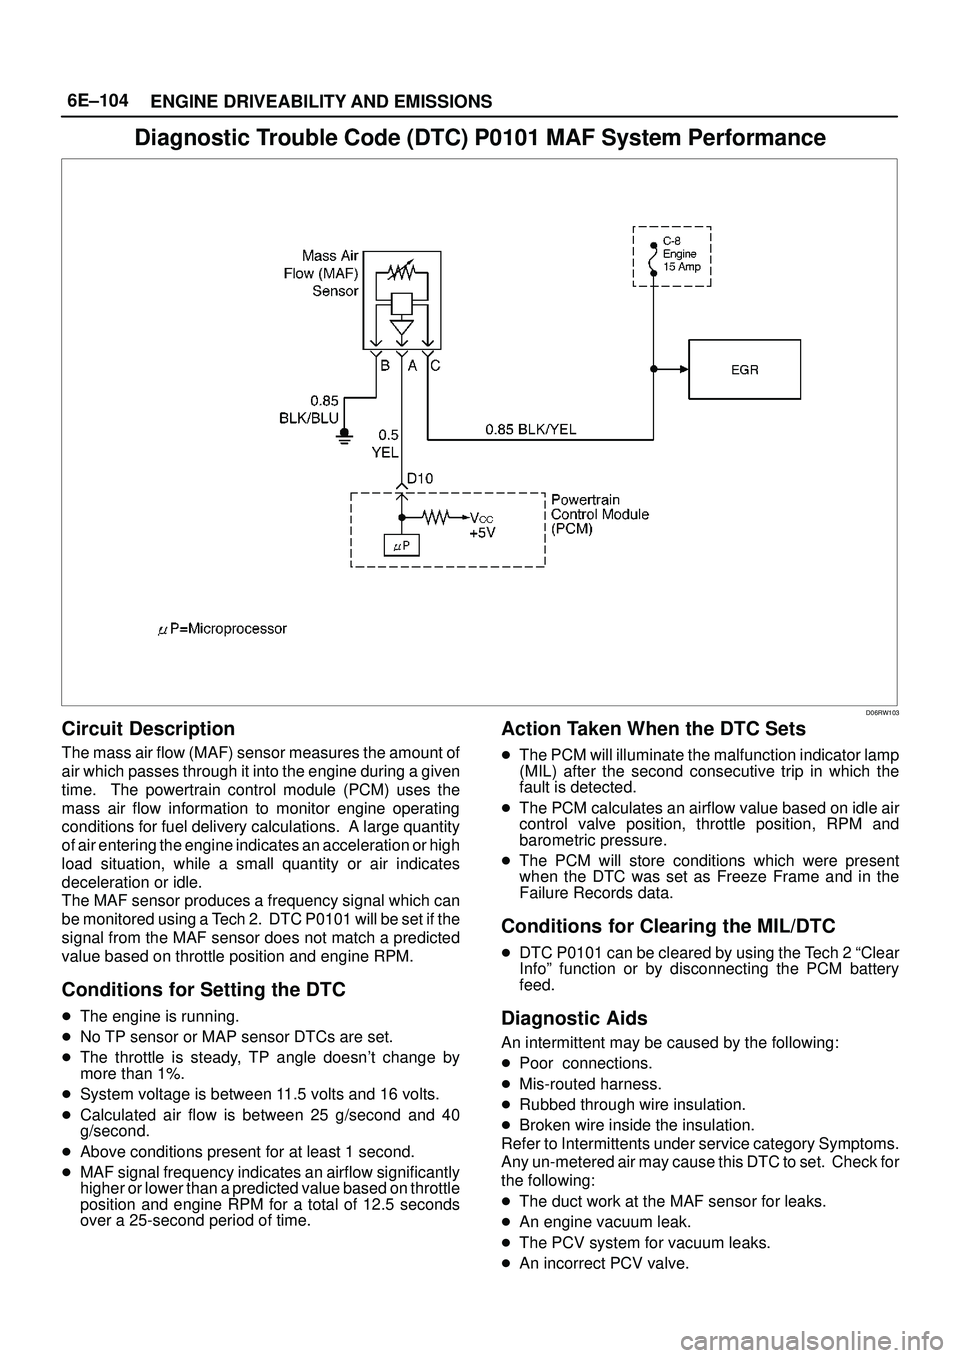 ISUZU TROOPER 1998  Service User Guide 6E±104
ENGINE DRIVEABILITY AND EMISSIONS
Diagnostic Trouble Code (DTC) P0101 MAF System Performance
D06RW103
Circuit Description
The mass air flow (MAF) sensor measures the amount of
air which passes